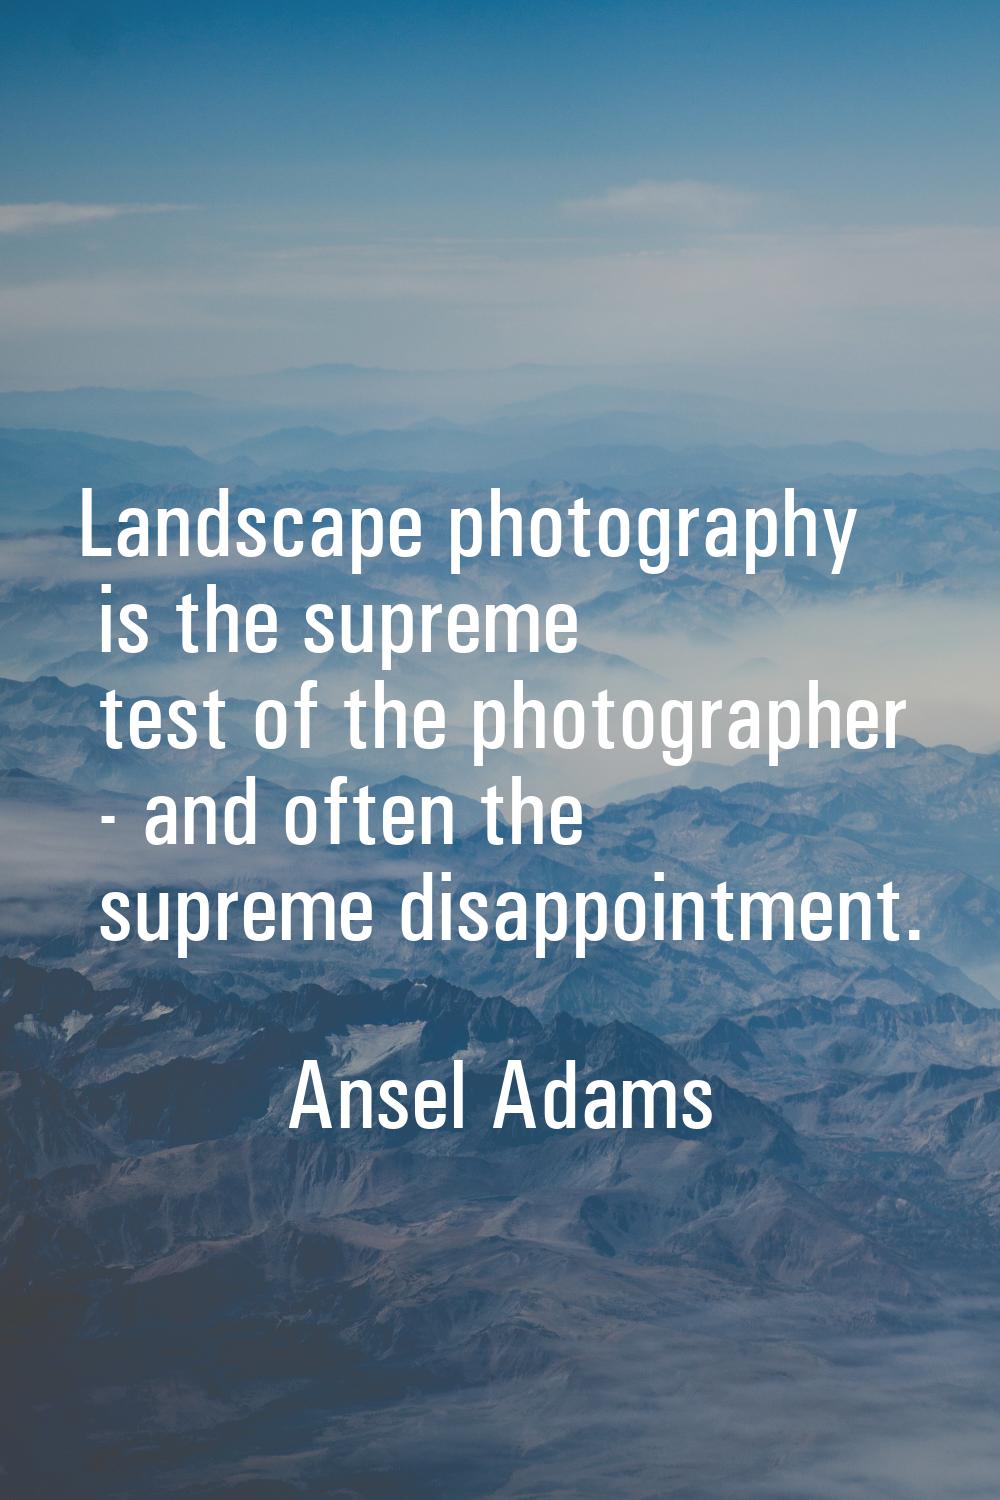 Landscape photography is the supreme test of the photographer - and often the supreme disappointmen